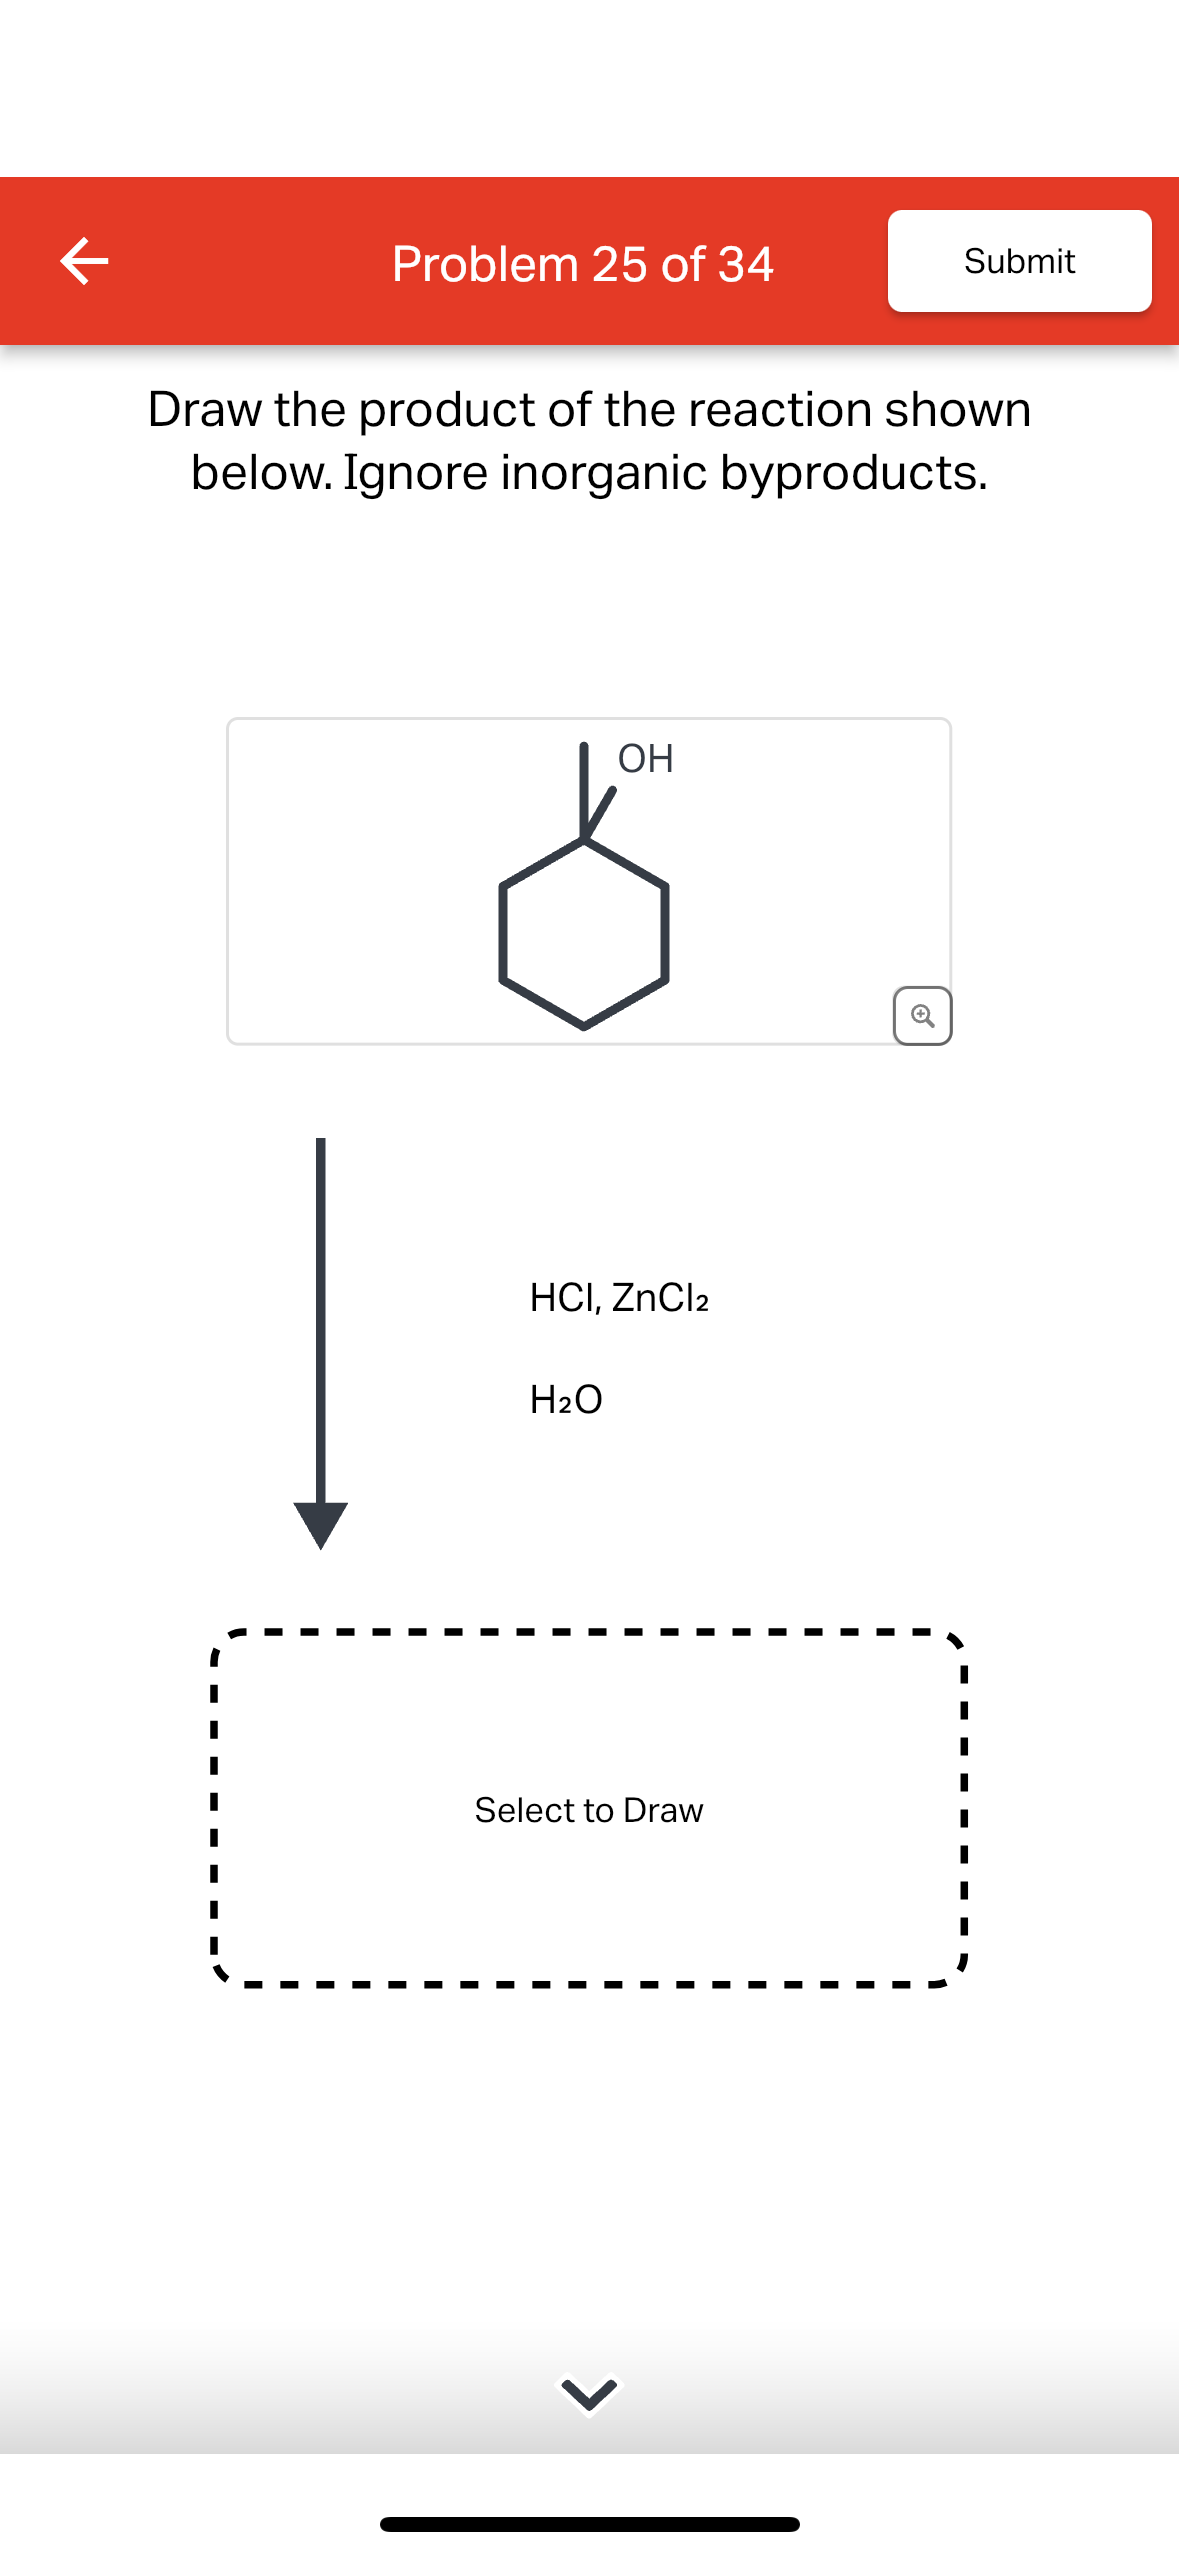 K
Problem 25 of 34
Draw the product of the reaction shown
below. Ignore inorganic byproducts.
OH
HCI, ZnCl2
H₂O
Submit
Select to Draw